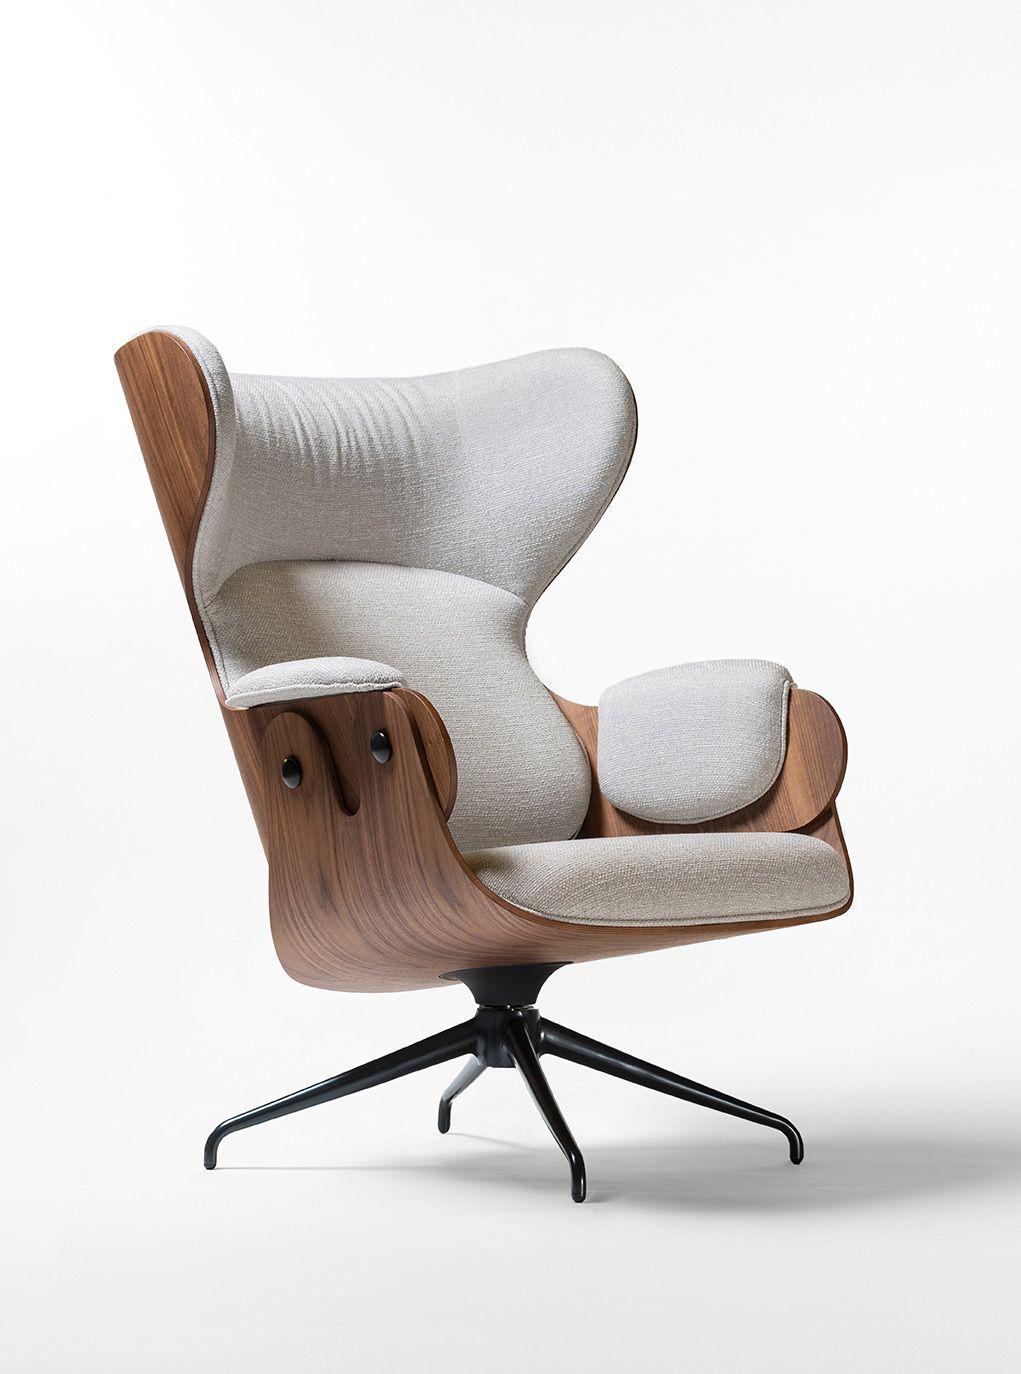 Spanish Lounger White Armchair by Jaime Hayon